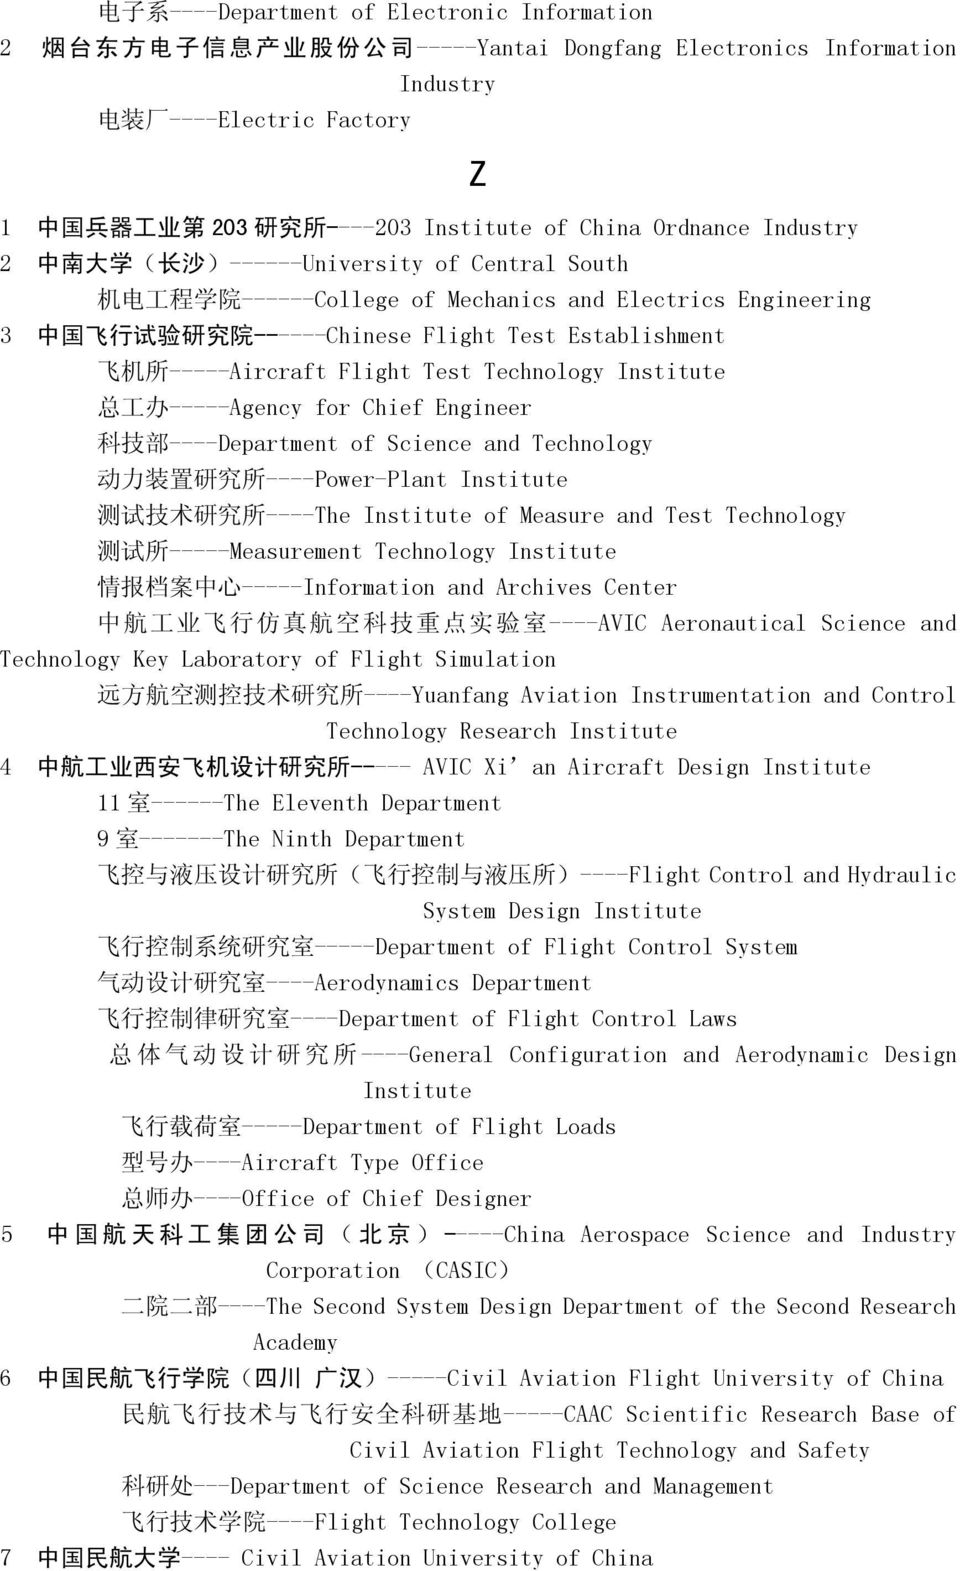 Establishment 飞 机 所 -----Aircraft Flight Test Technology Institute 总 工 办 -----Agency for Chief Engineer 科 技 部 ----Department of Science and Technology 动 力 装 置 研 究 所 ----Power-Plant Institute 测 试 技 术